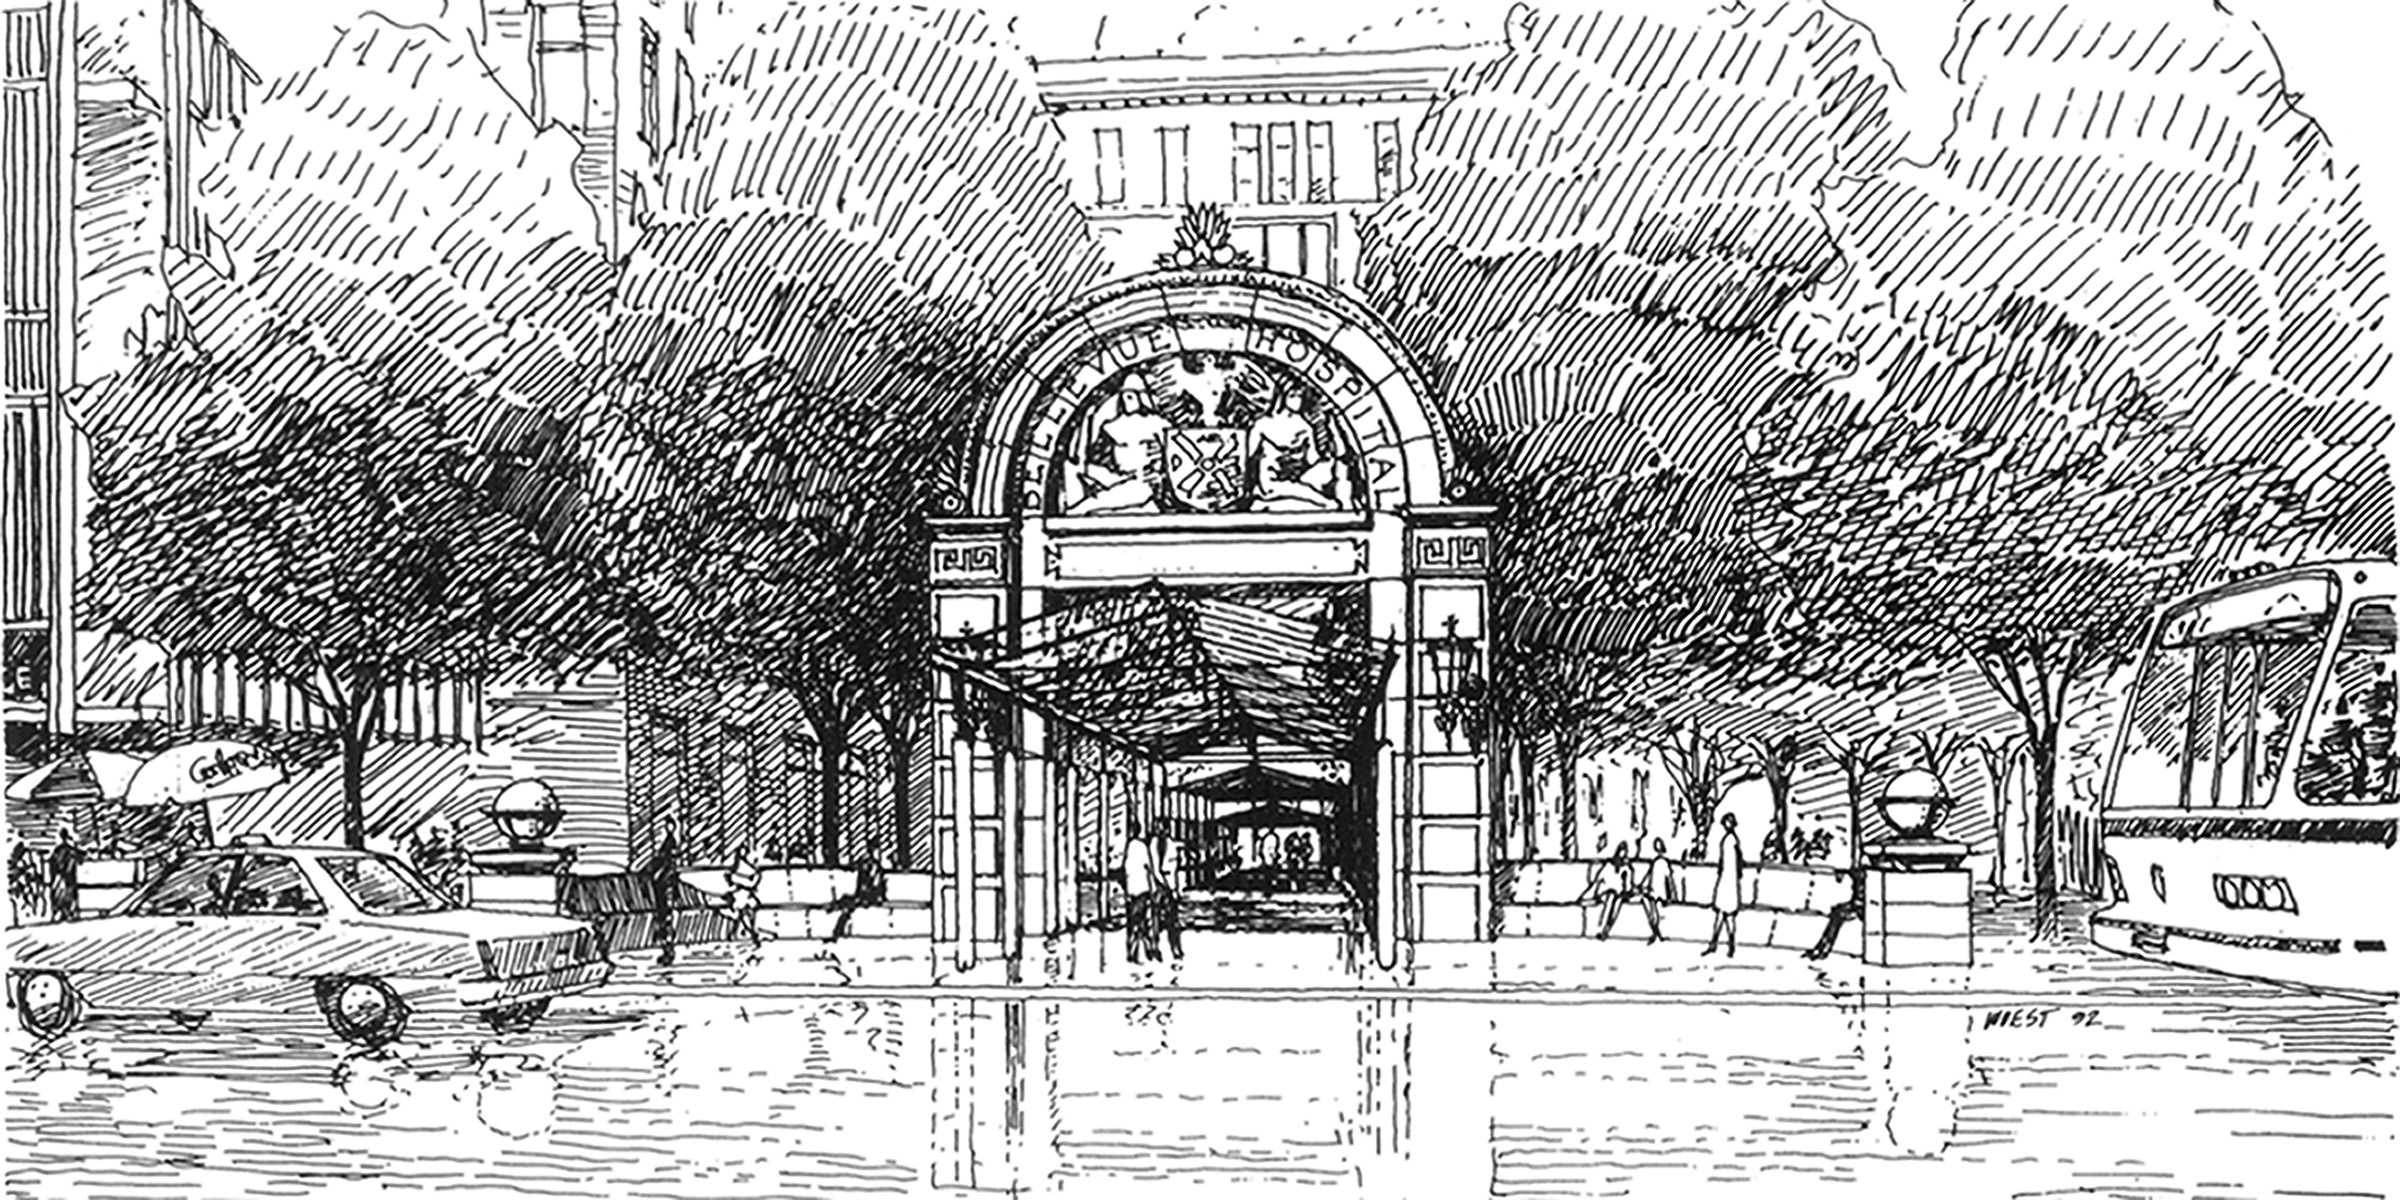 BH - New Entrance Arch - Exterior View 1 Line Drawing.jpg